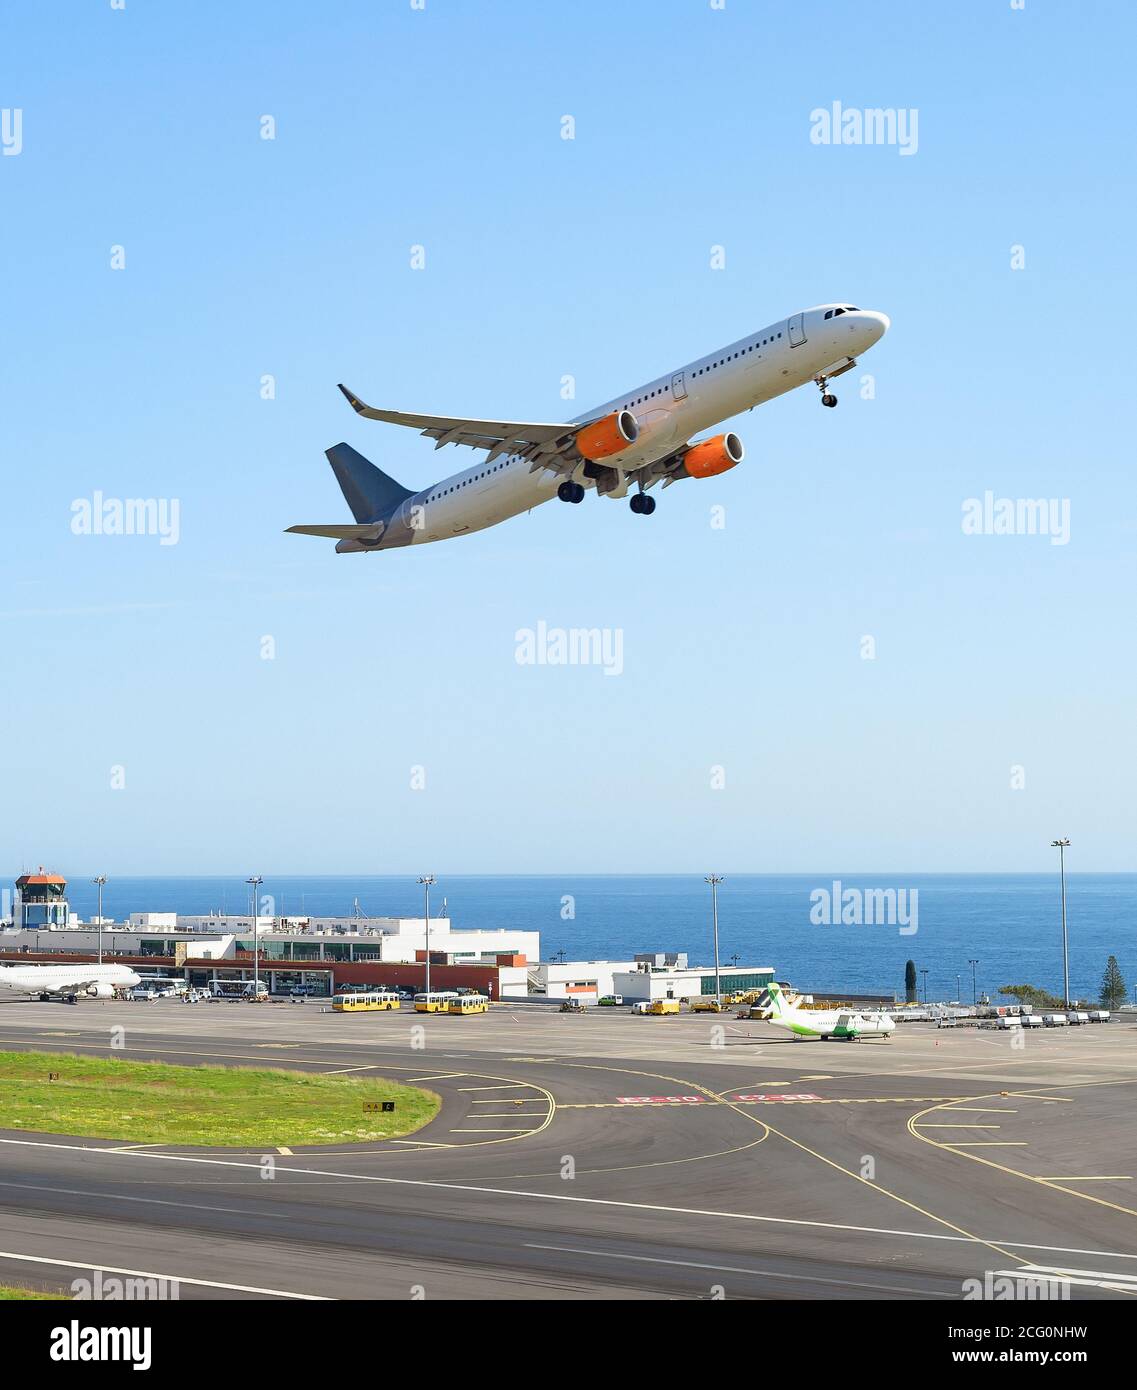 Airplane taking off runway at Madeira international airport, terminal building and seascape in background, Portugal Stock Photo